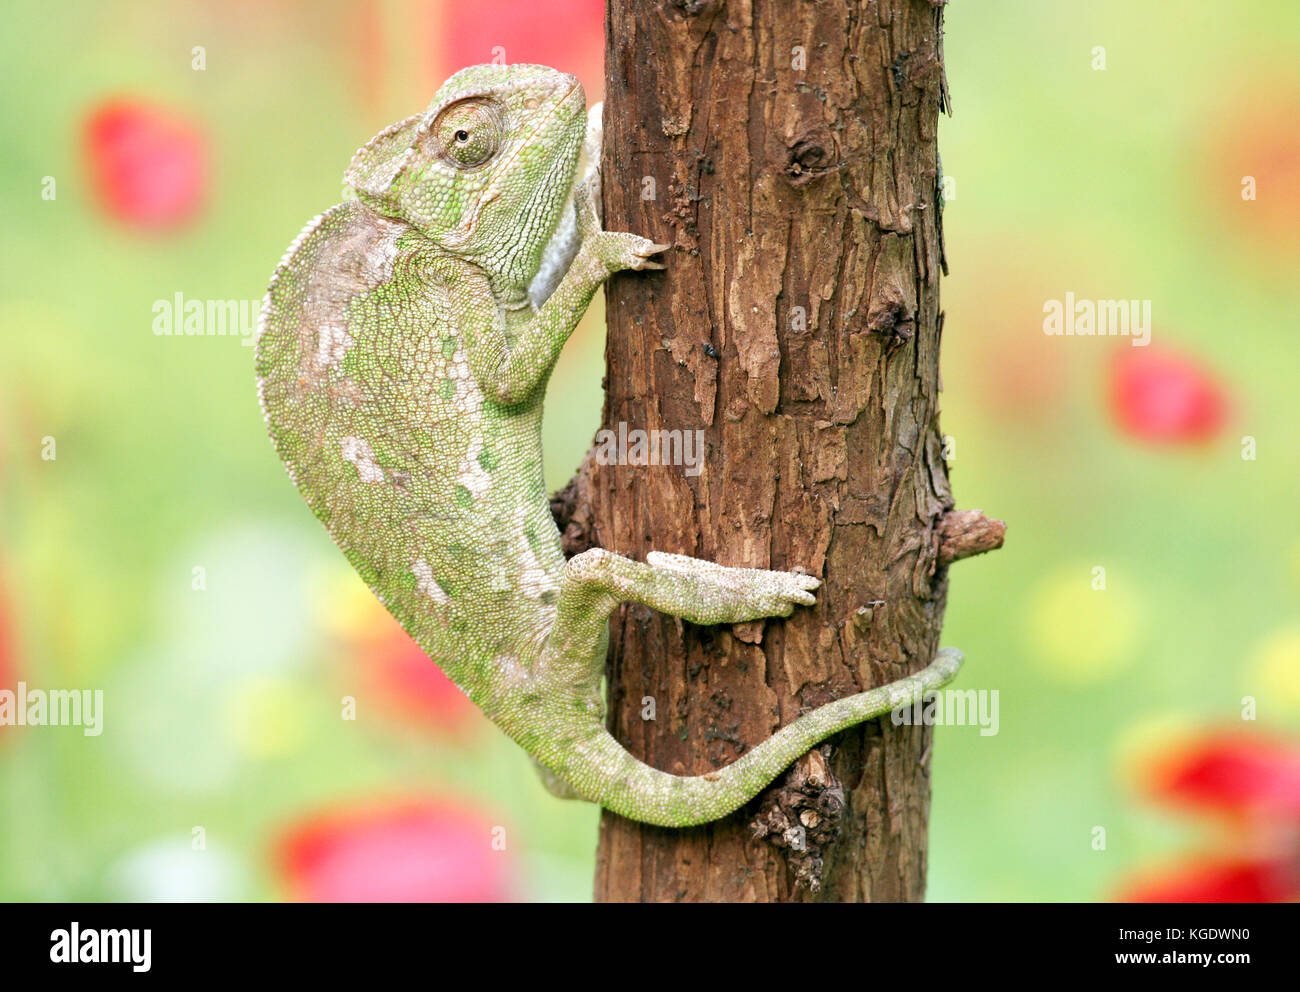 Common Chameleon (Chamaeleo chamaeleon) climbs a tree. The common chameleon and its subspecies are found throughout much of North Africa and the Middl Stock Photo